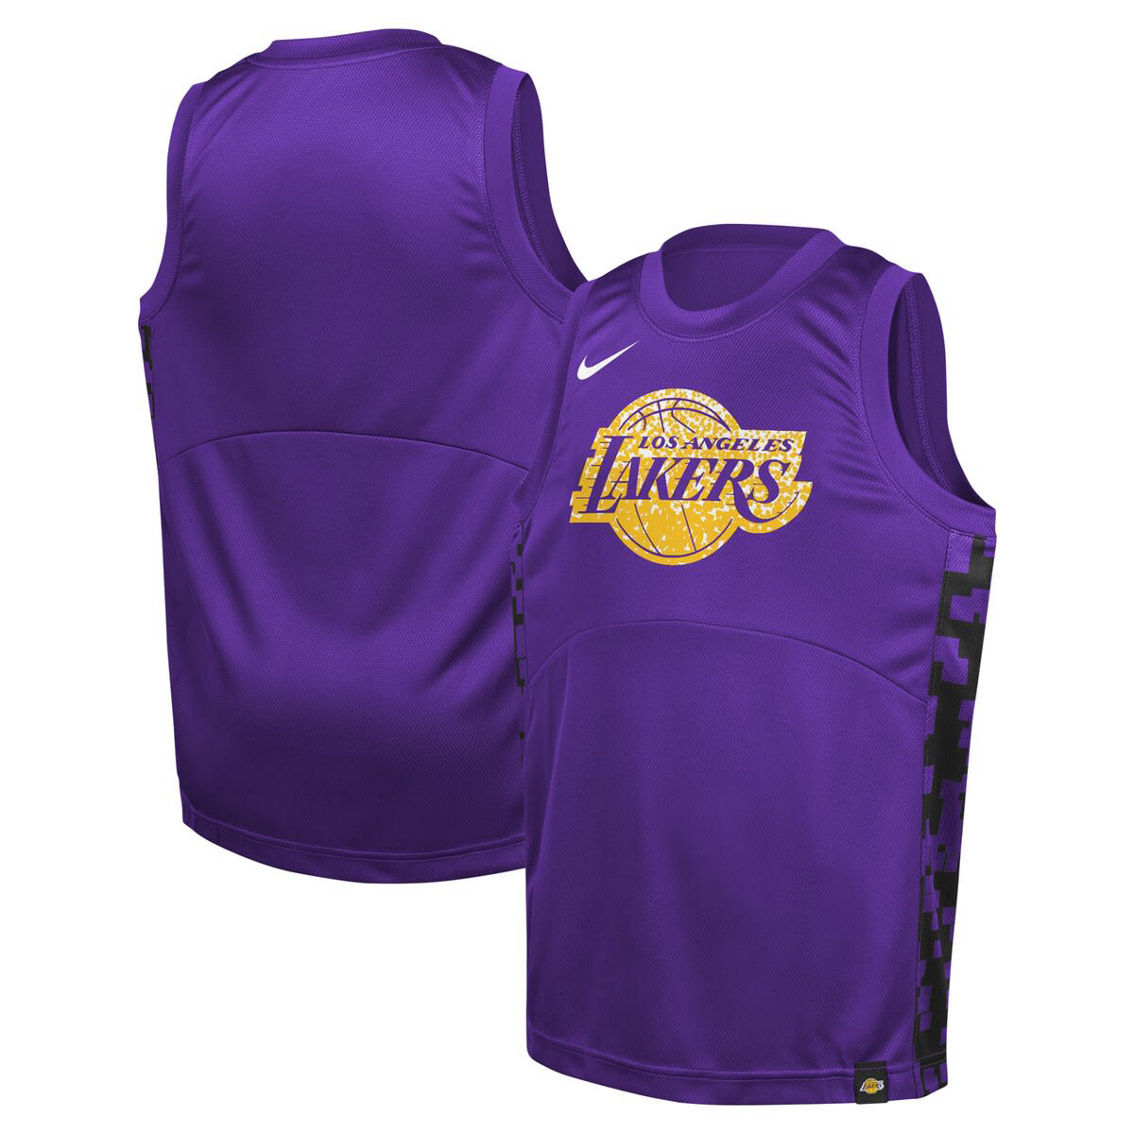 Nike Youth Purple Los Angeles Lakers Courtside Starting Five Team Jersey - Image 2 of 4